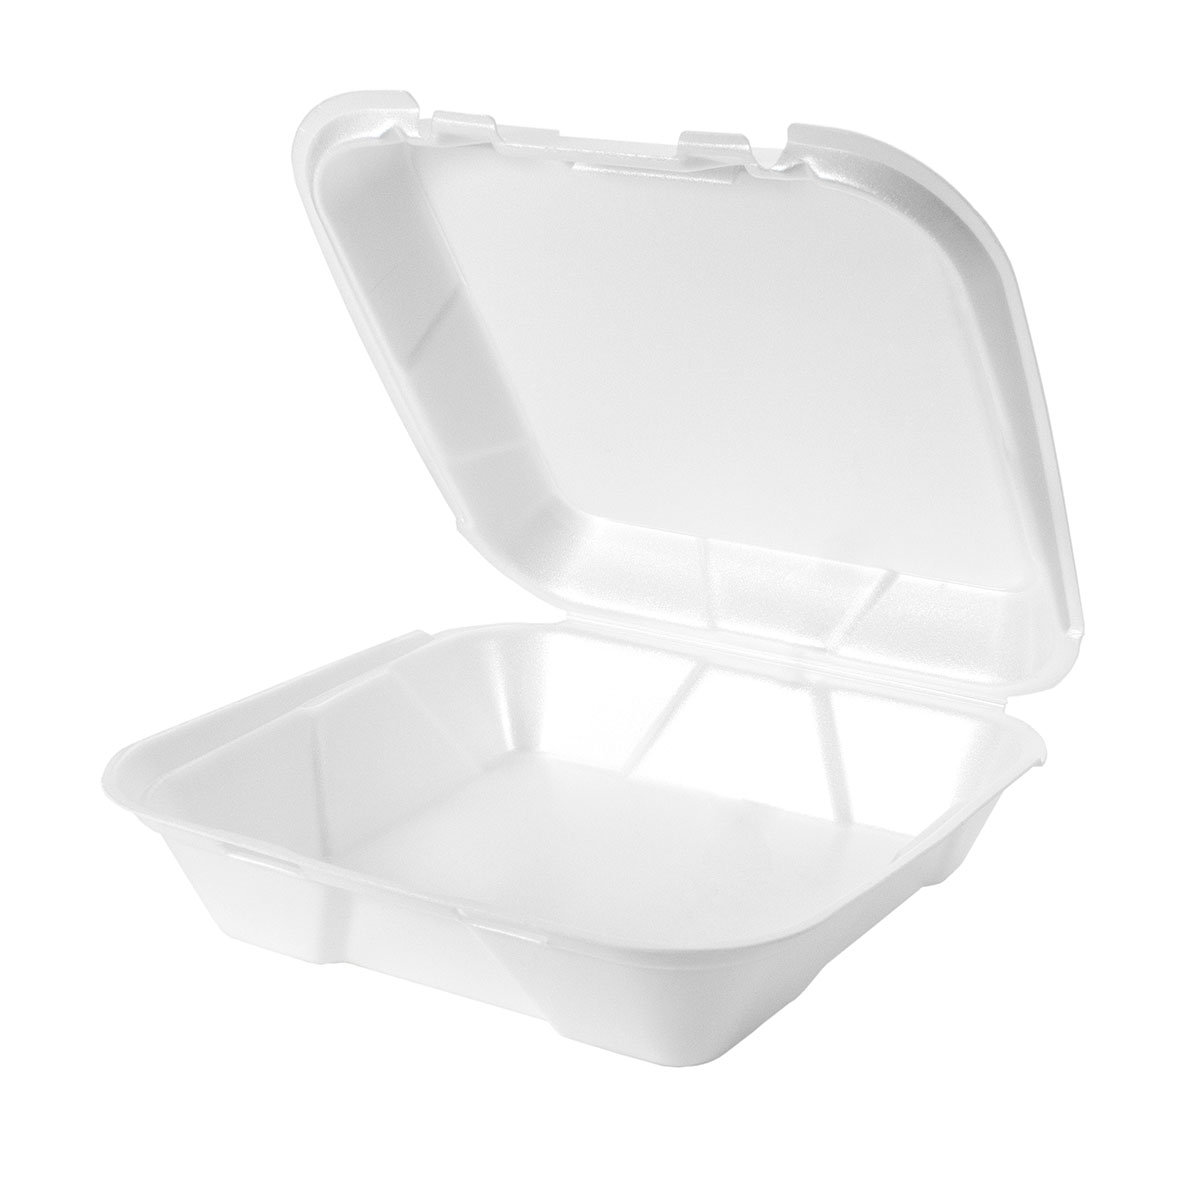 White 9" x 9" Snap It Lock Hinged Square Container